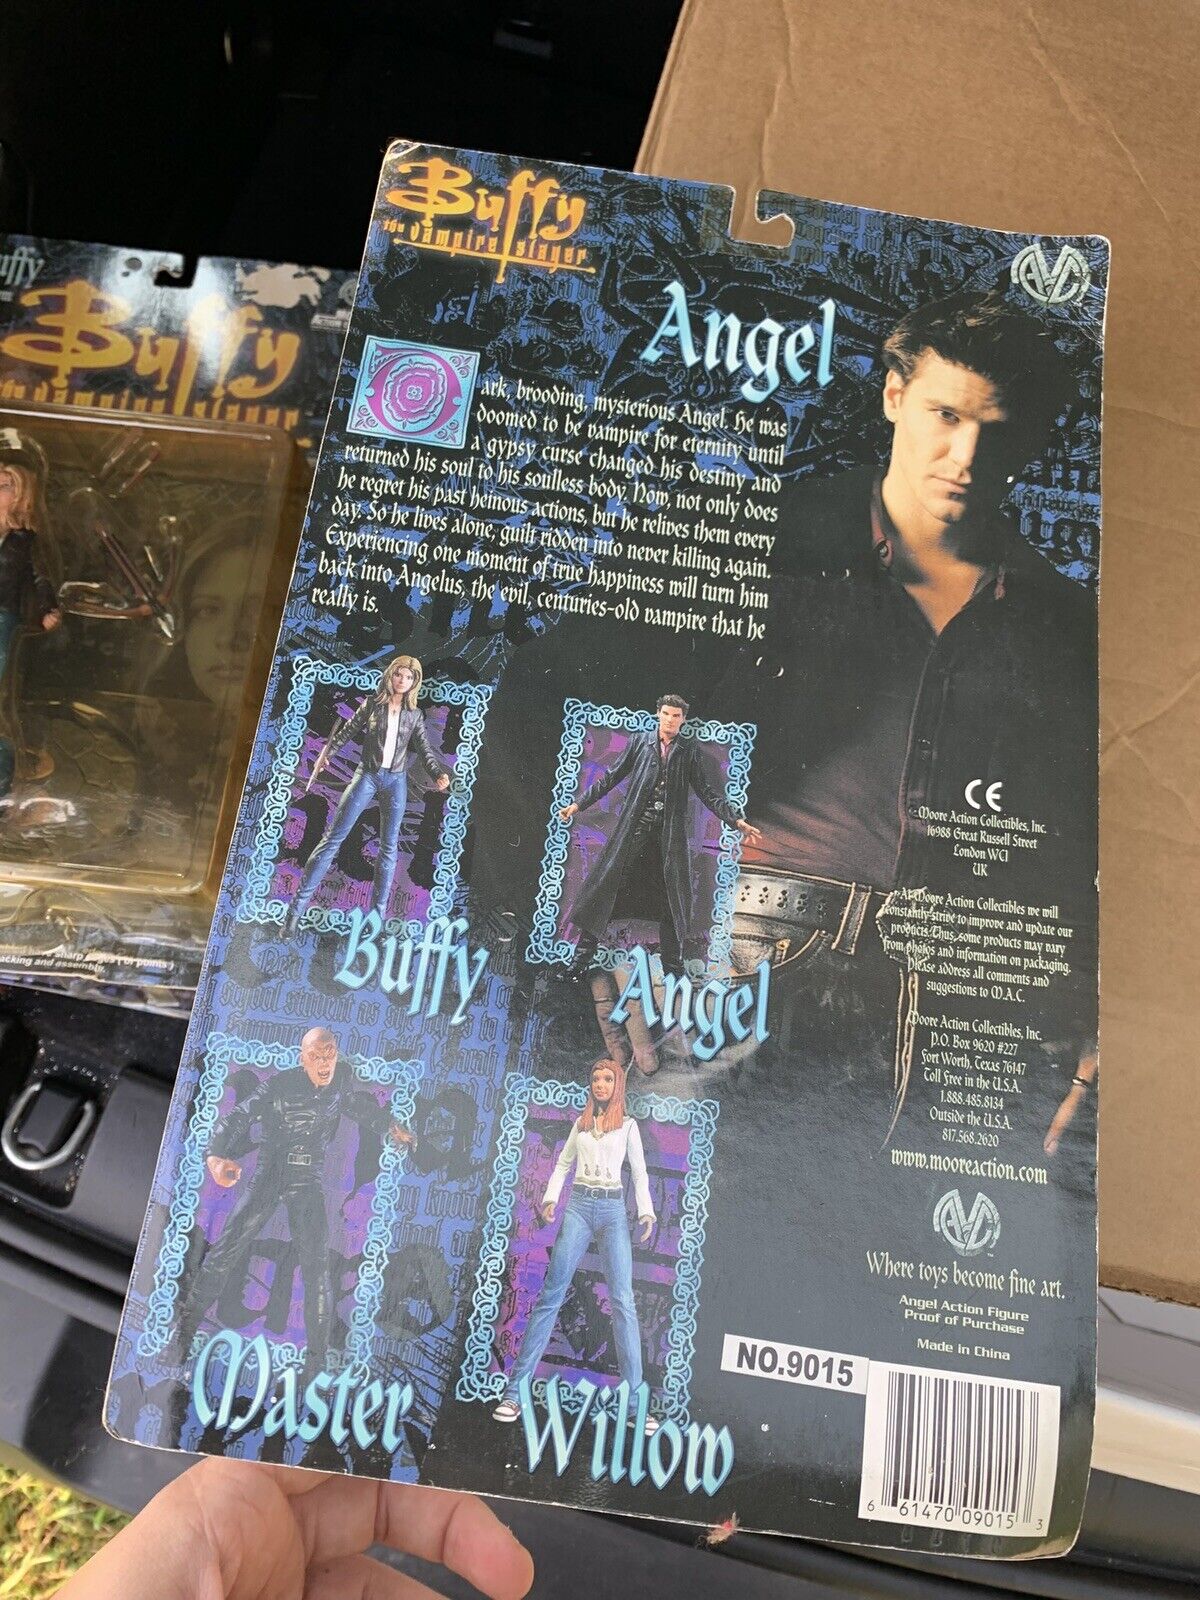 BUFFY VAMPIRE SLAYER  ANGEL FIGURE NEW IN PACKAGE MOORE ACTION